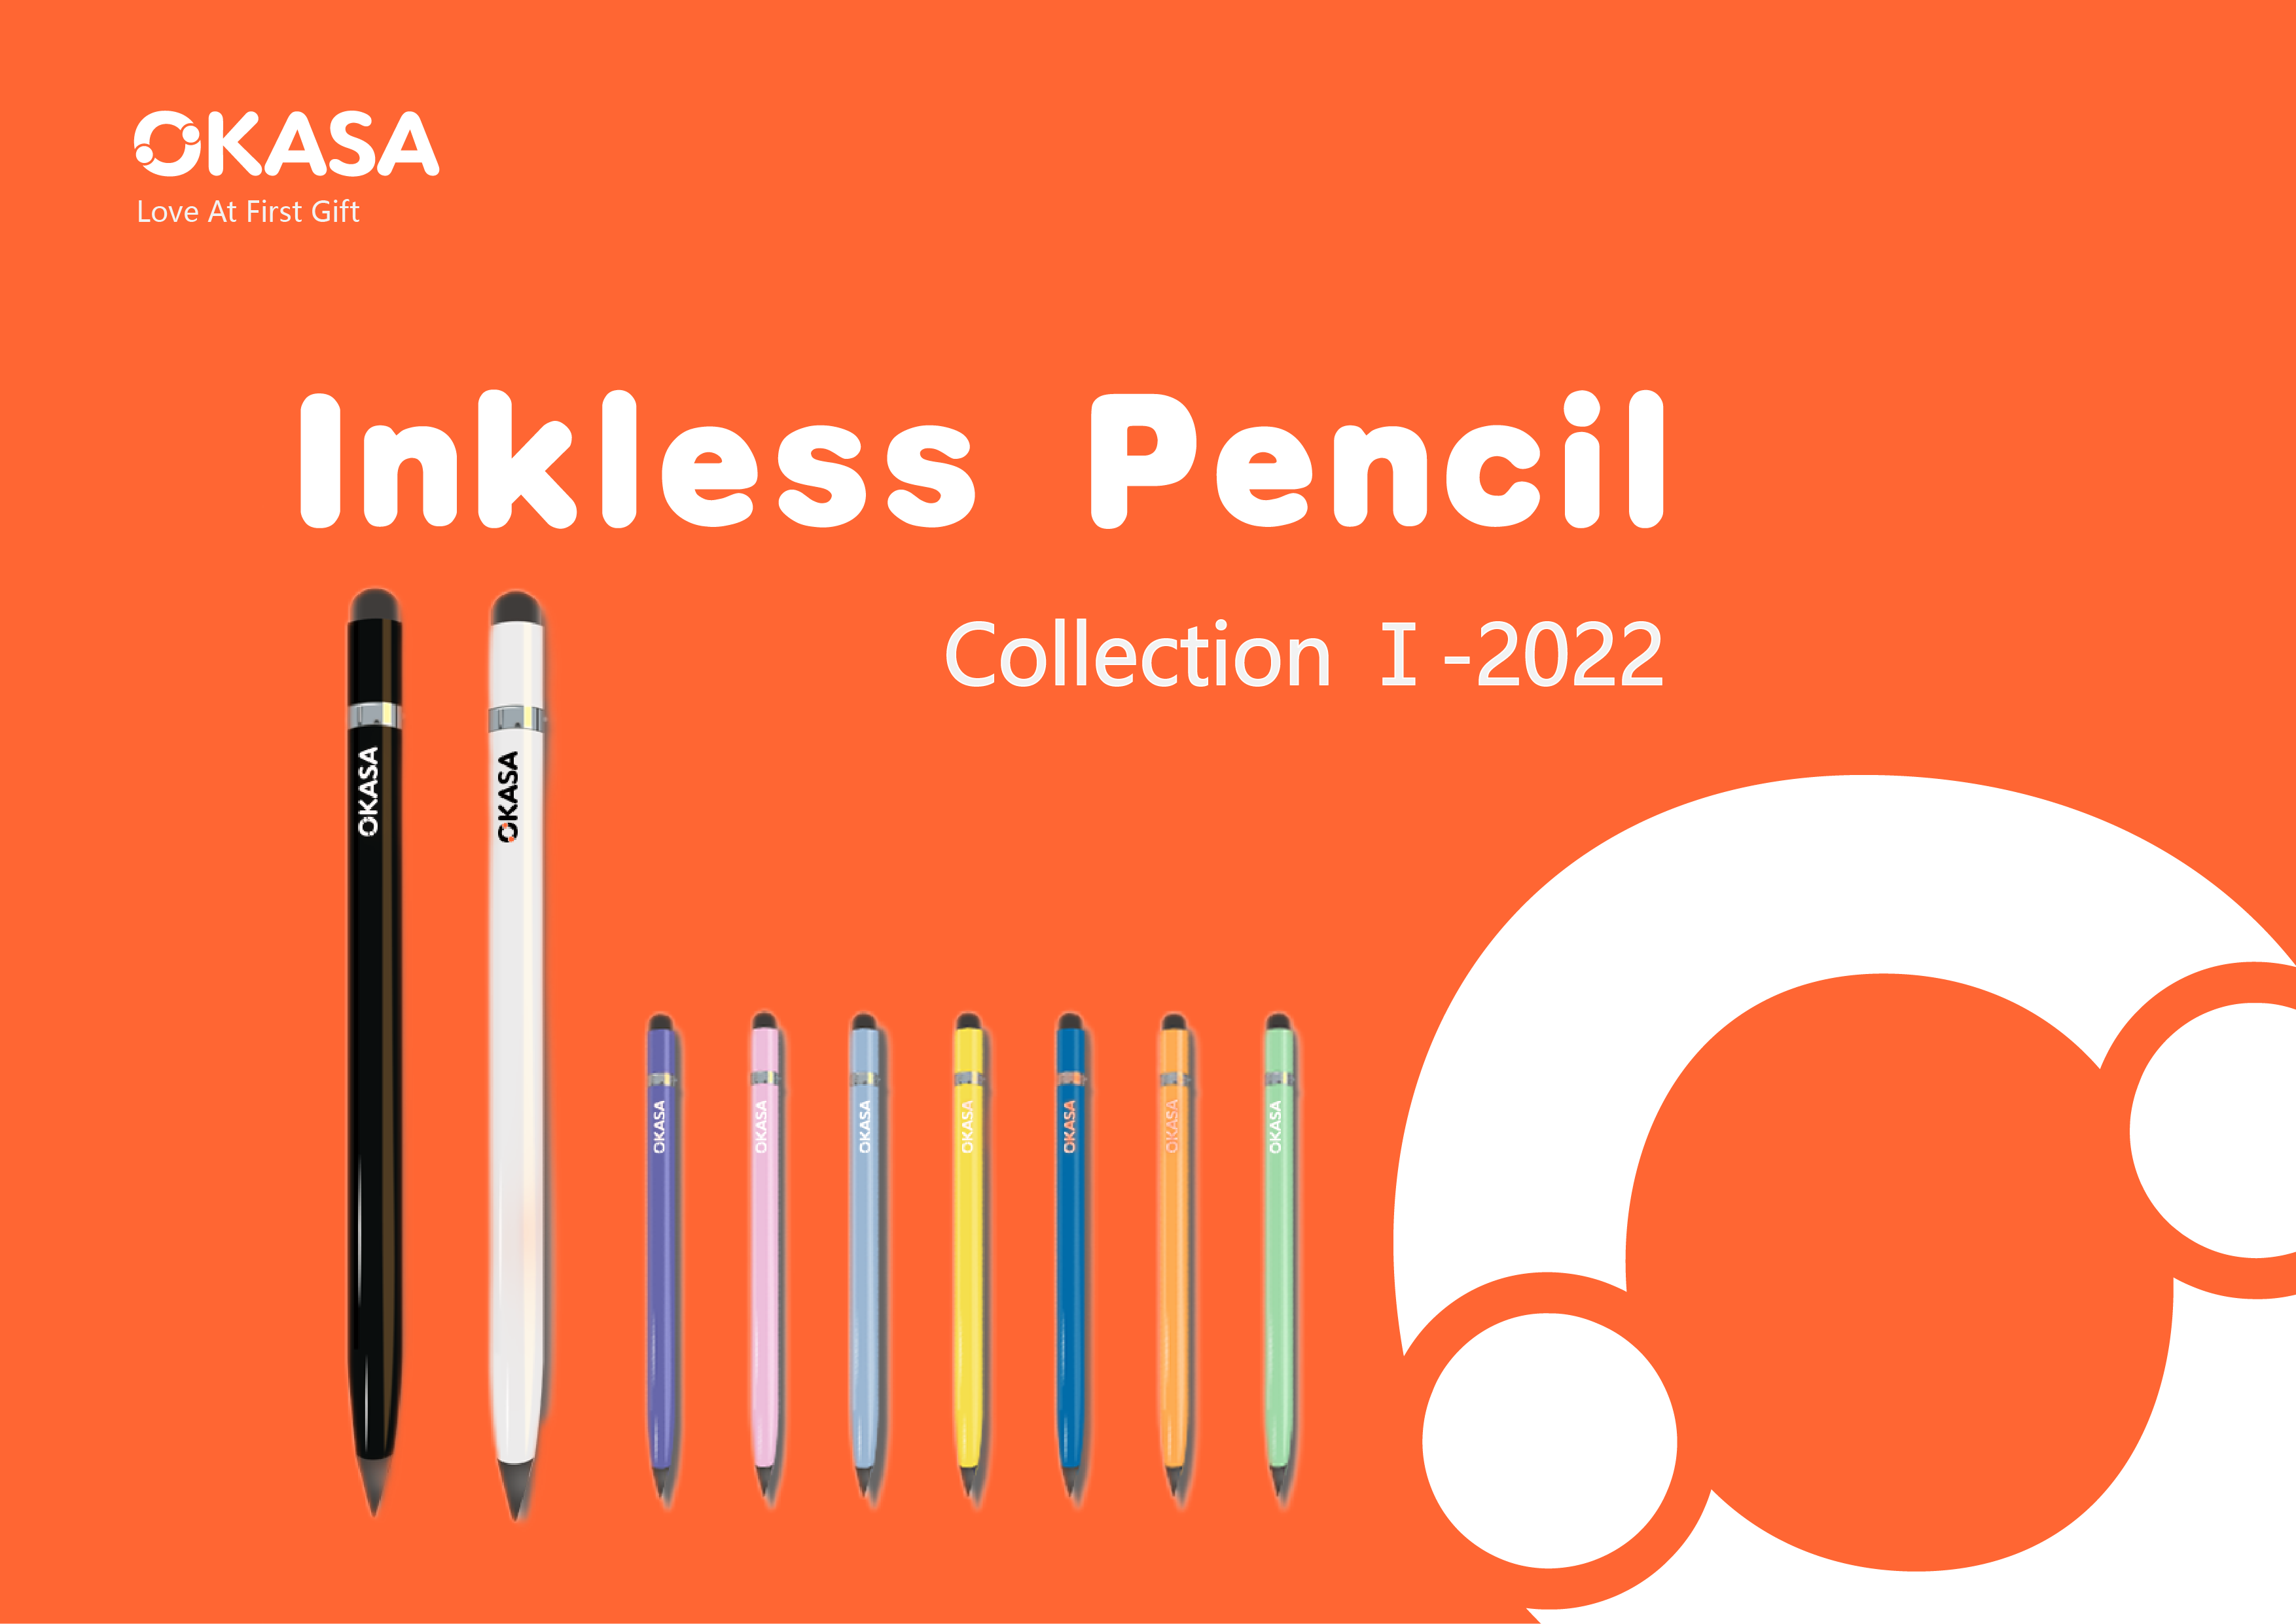 Inkless Pencil Collection I-2022